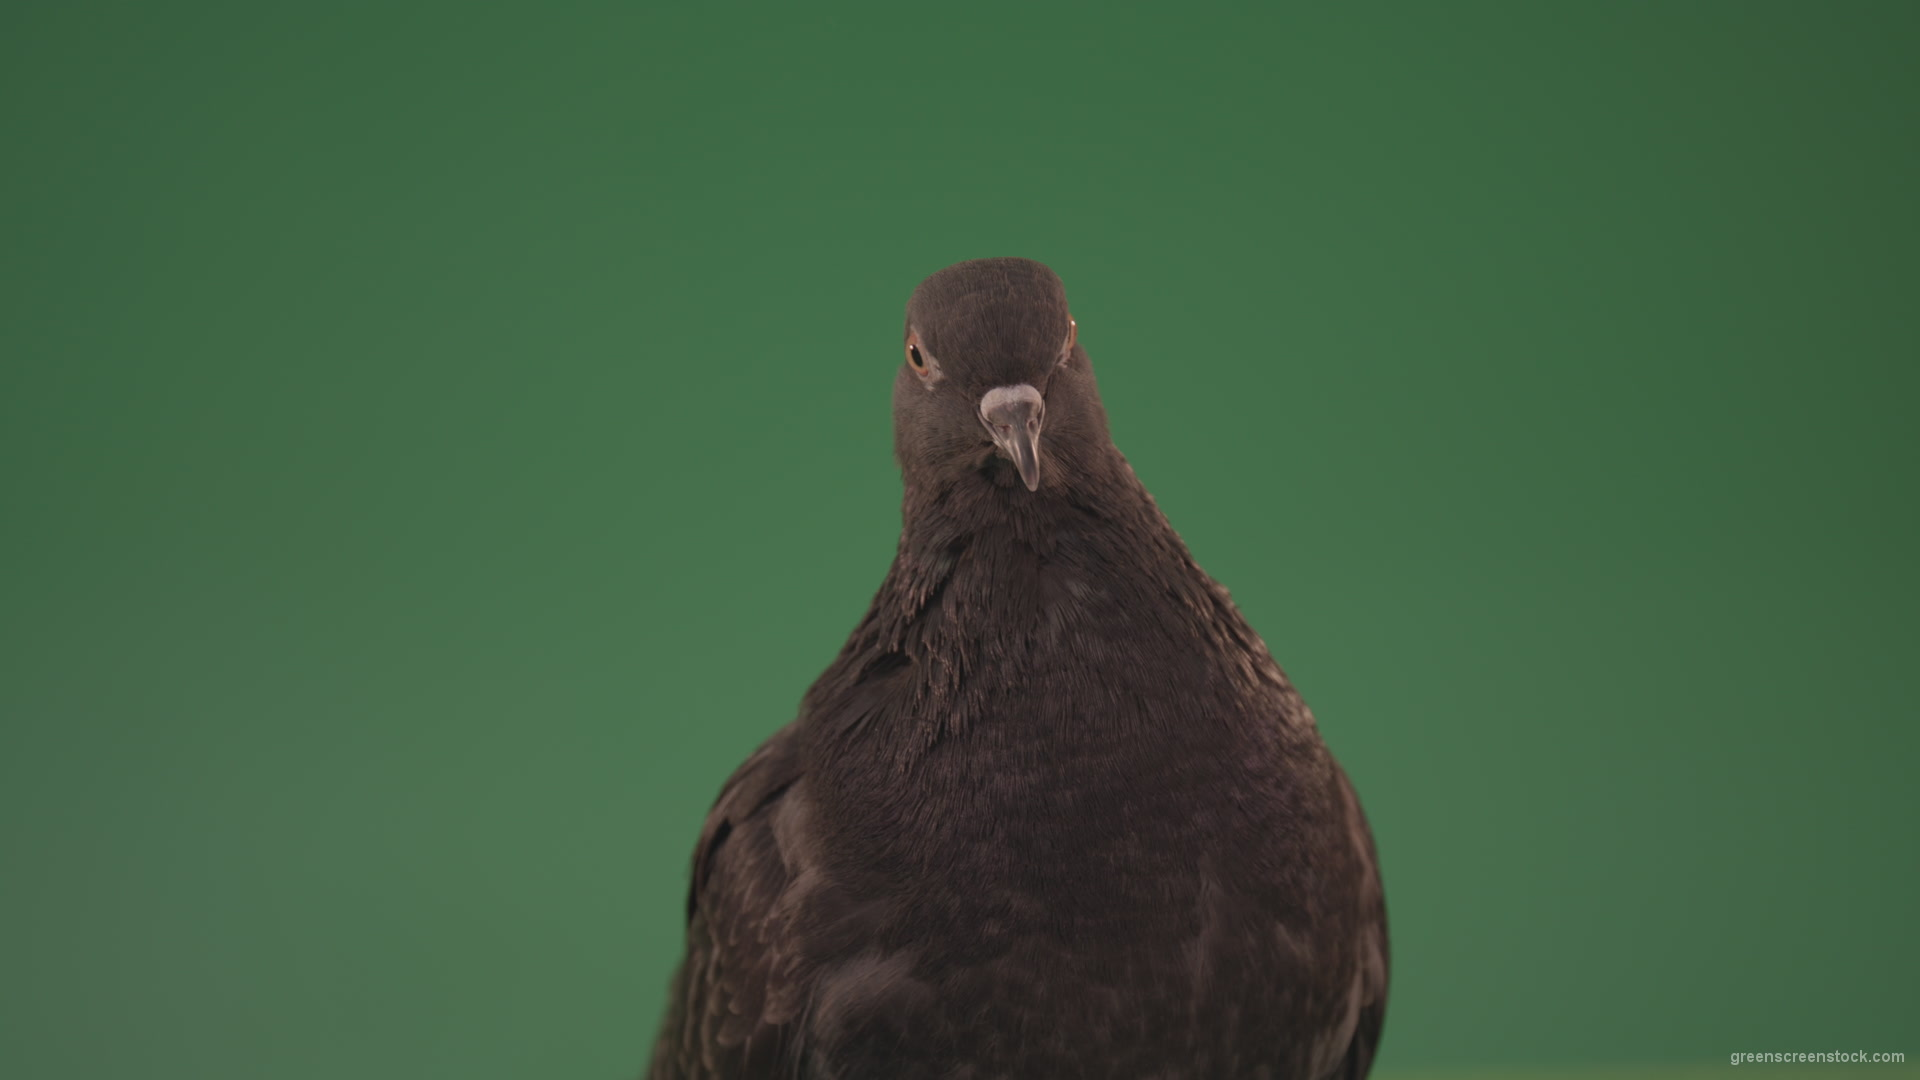 Bird-of-pigeon-is-sitting-on-the-house-and-looking-at-the-city-isolated-on-chromakey-background_004 Green Screen Stock